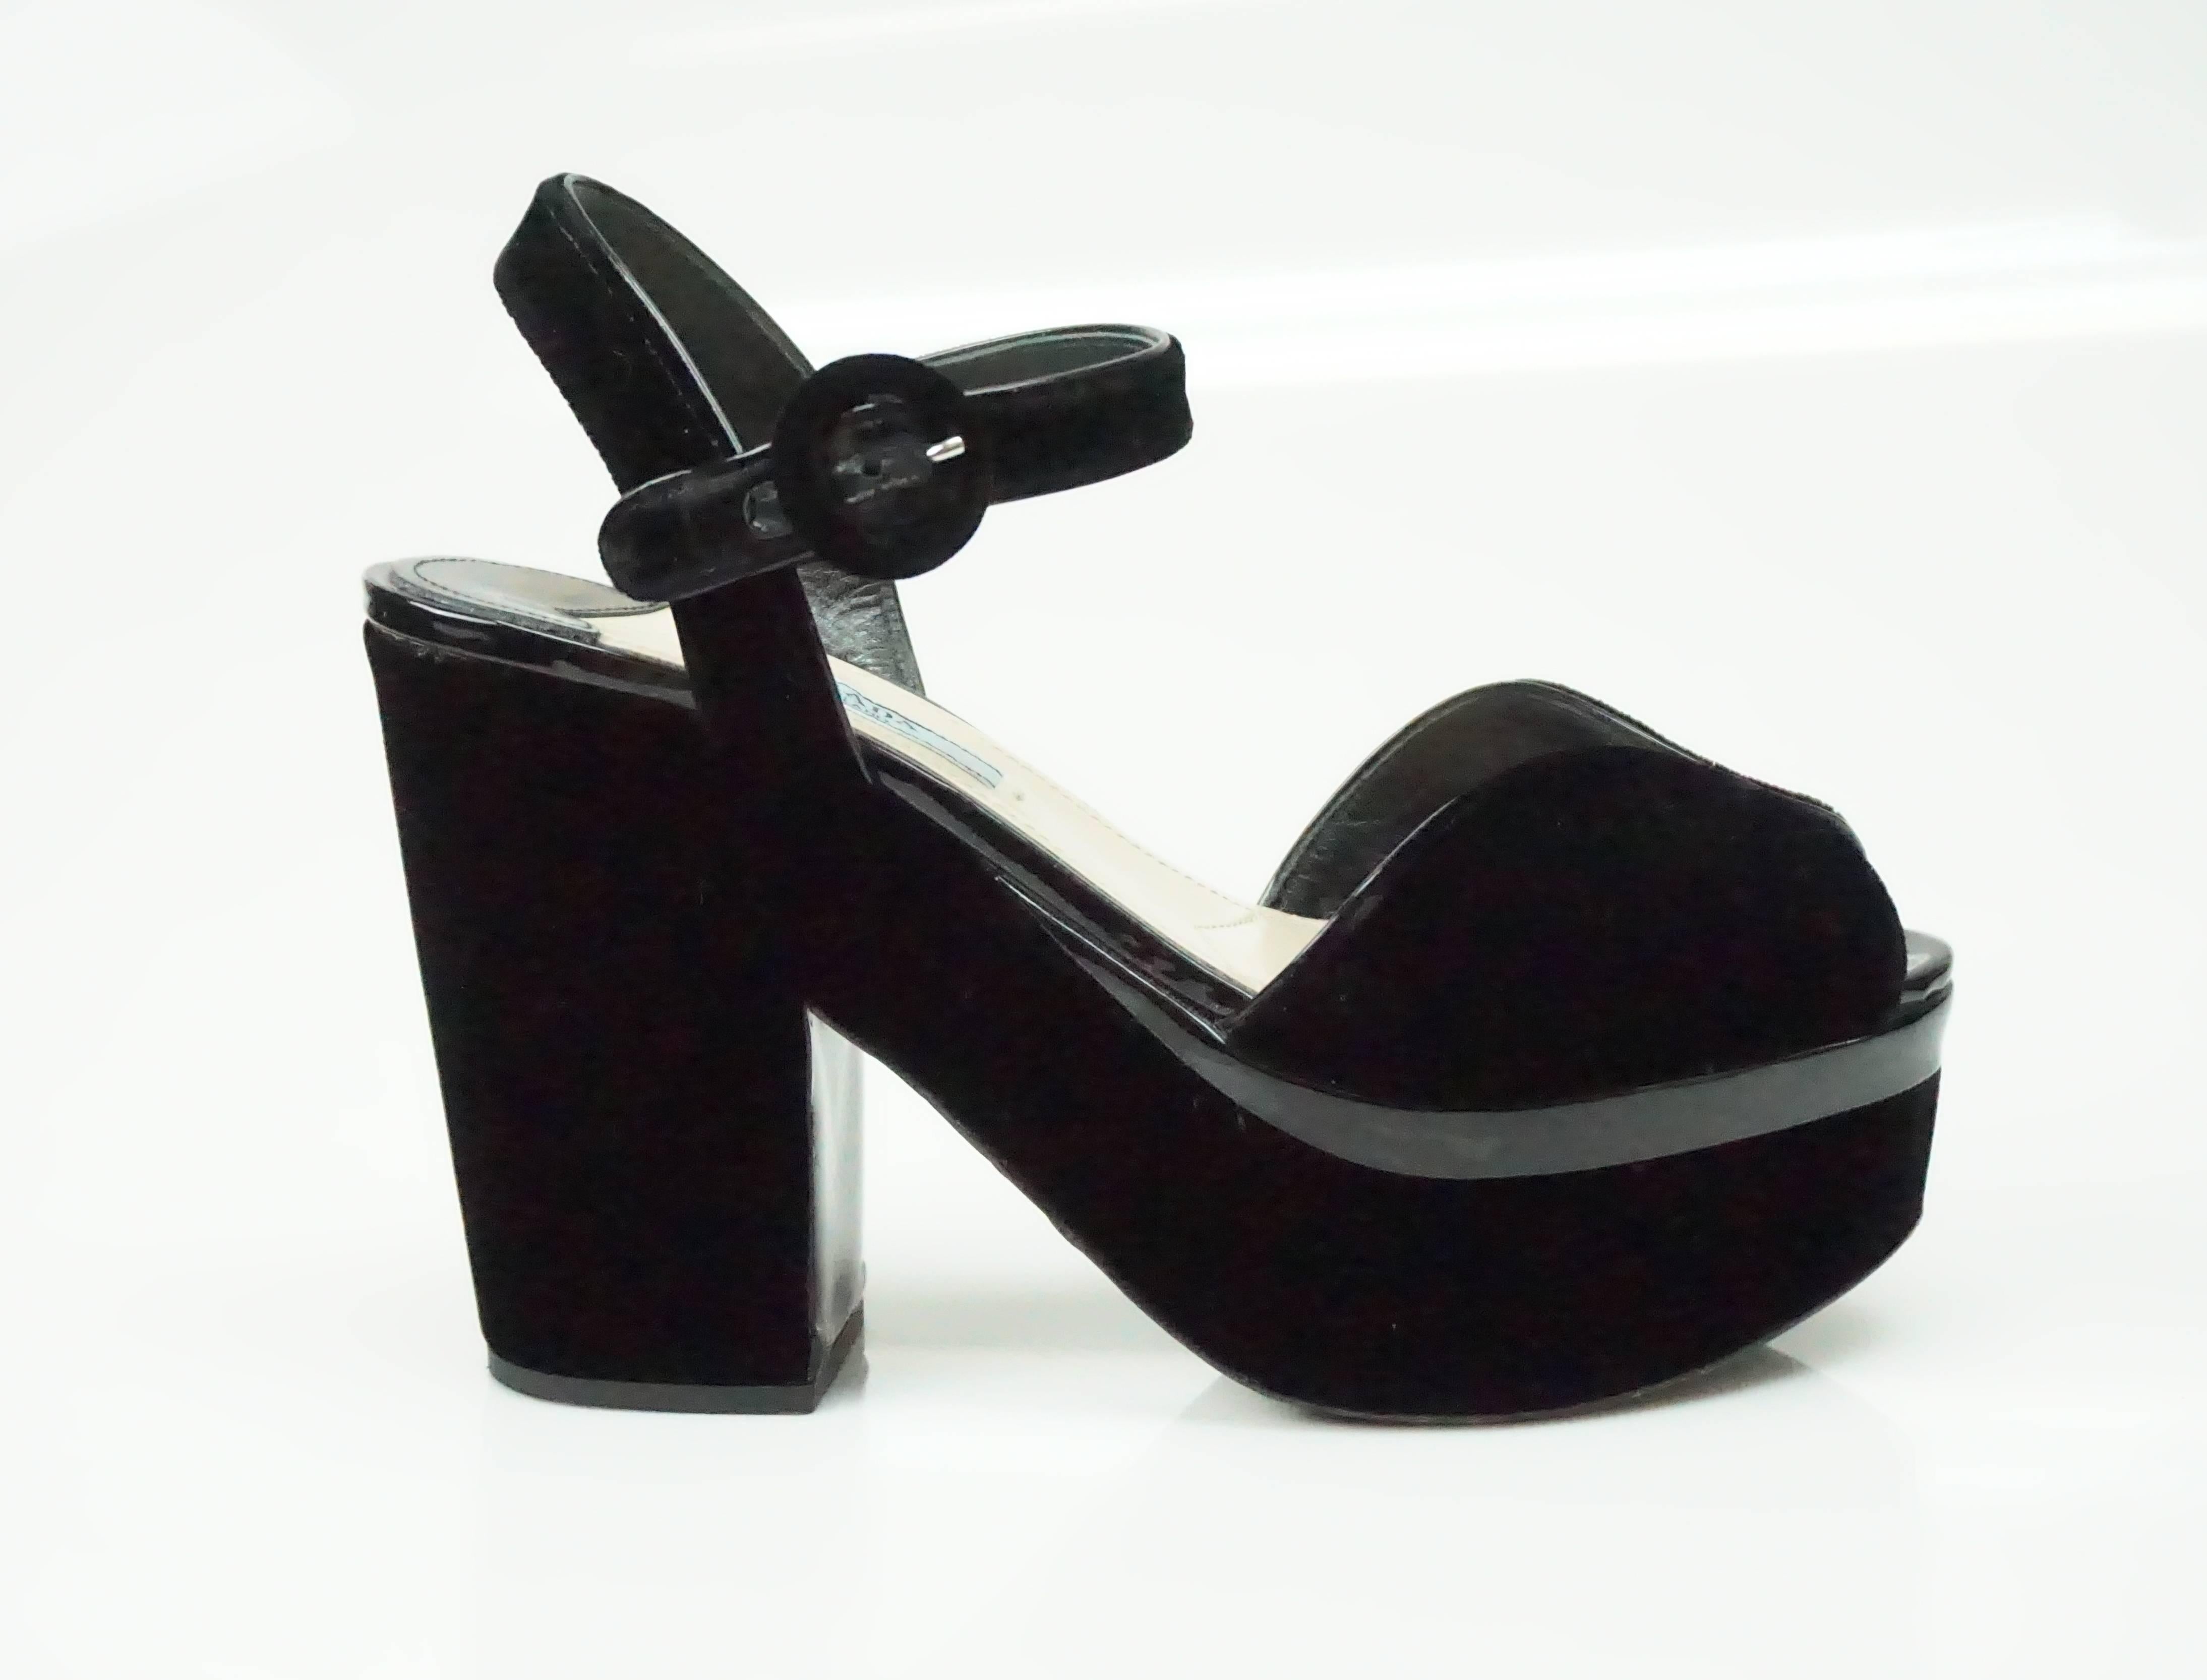 Prada Black Velvet Ankle Strap Platform Heel - 37  These spectacular shoes are in excellent condition.  They have a fabulous chunky heel and are truly so chic. There is some wear towards the sole of the shoe and some scuffing near the toe area.